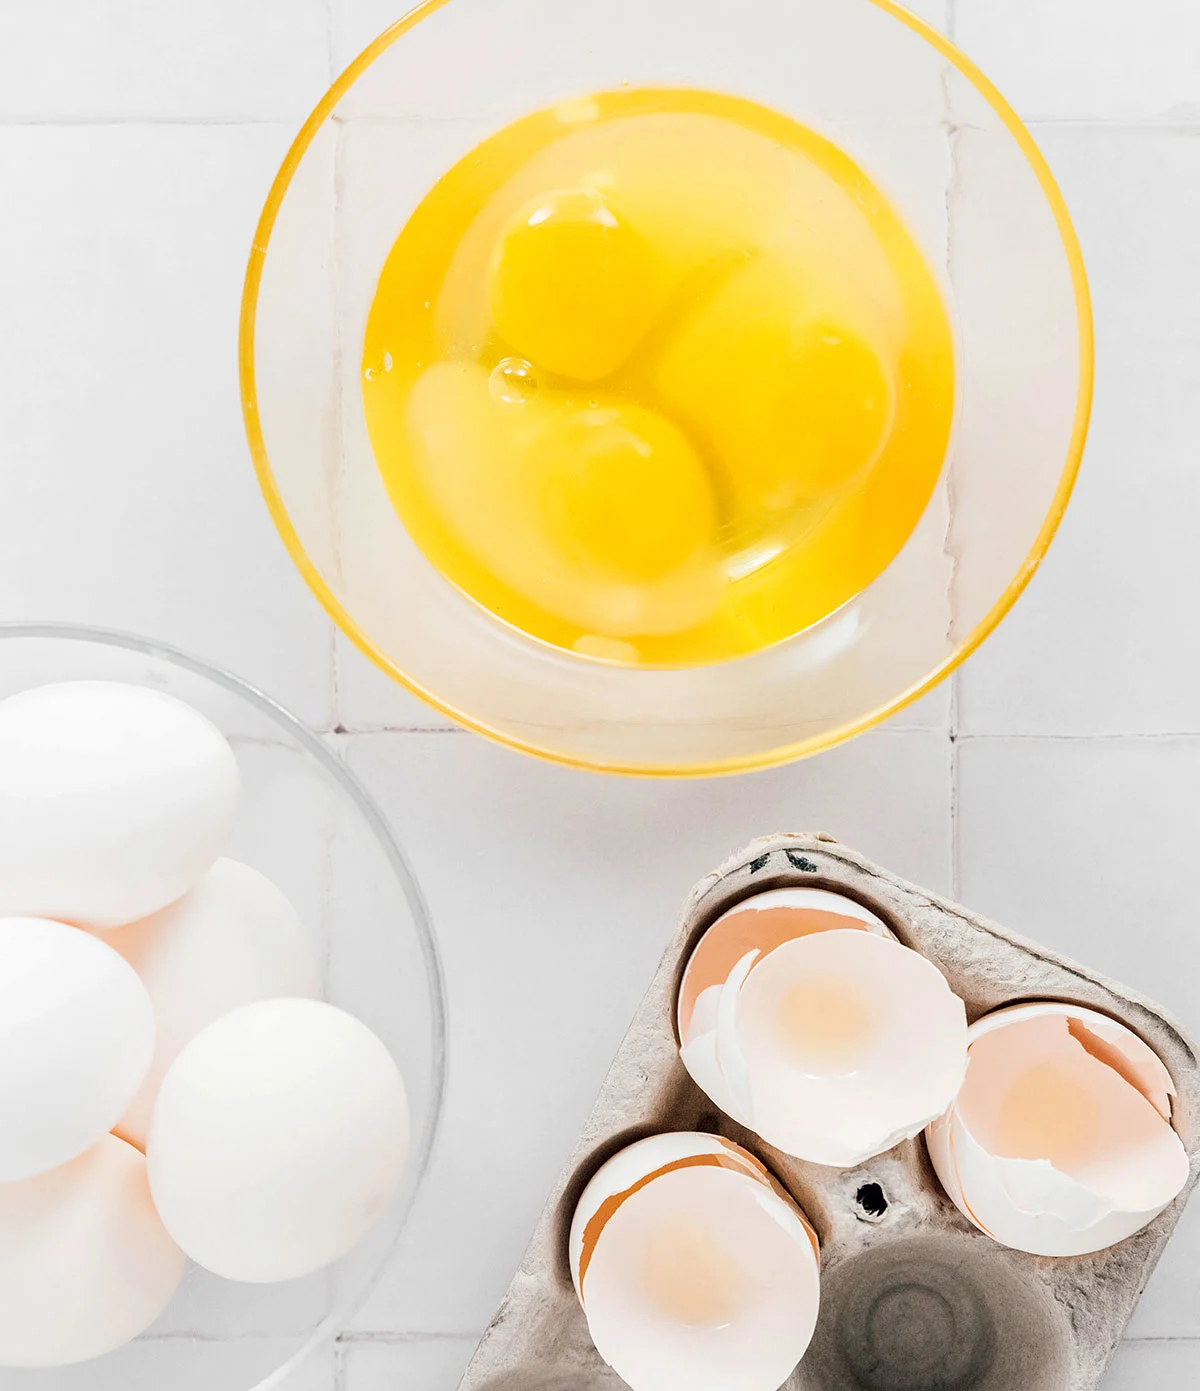 Eggs separated into yolks and shells